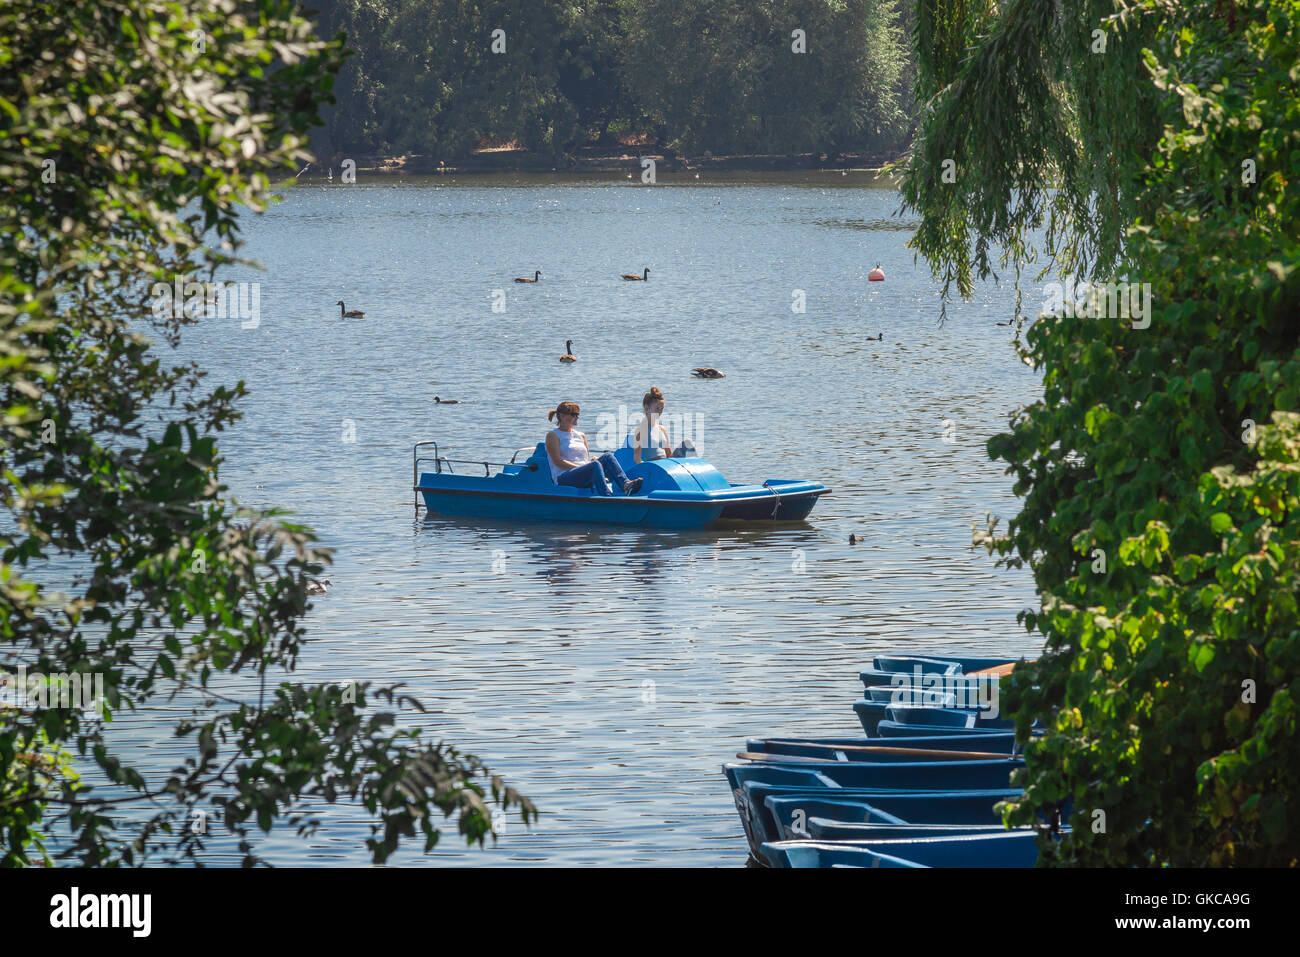 Women boat boating, view of female tourists in a boat enjoying a summer afternoon on the boating lake in Regent's Park, UK. Stock Photo